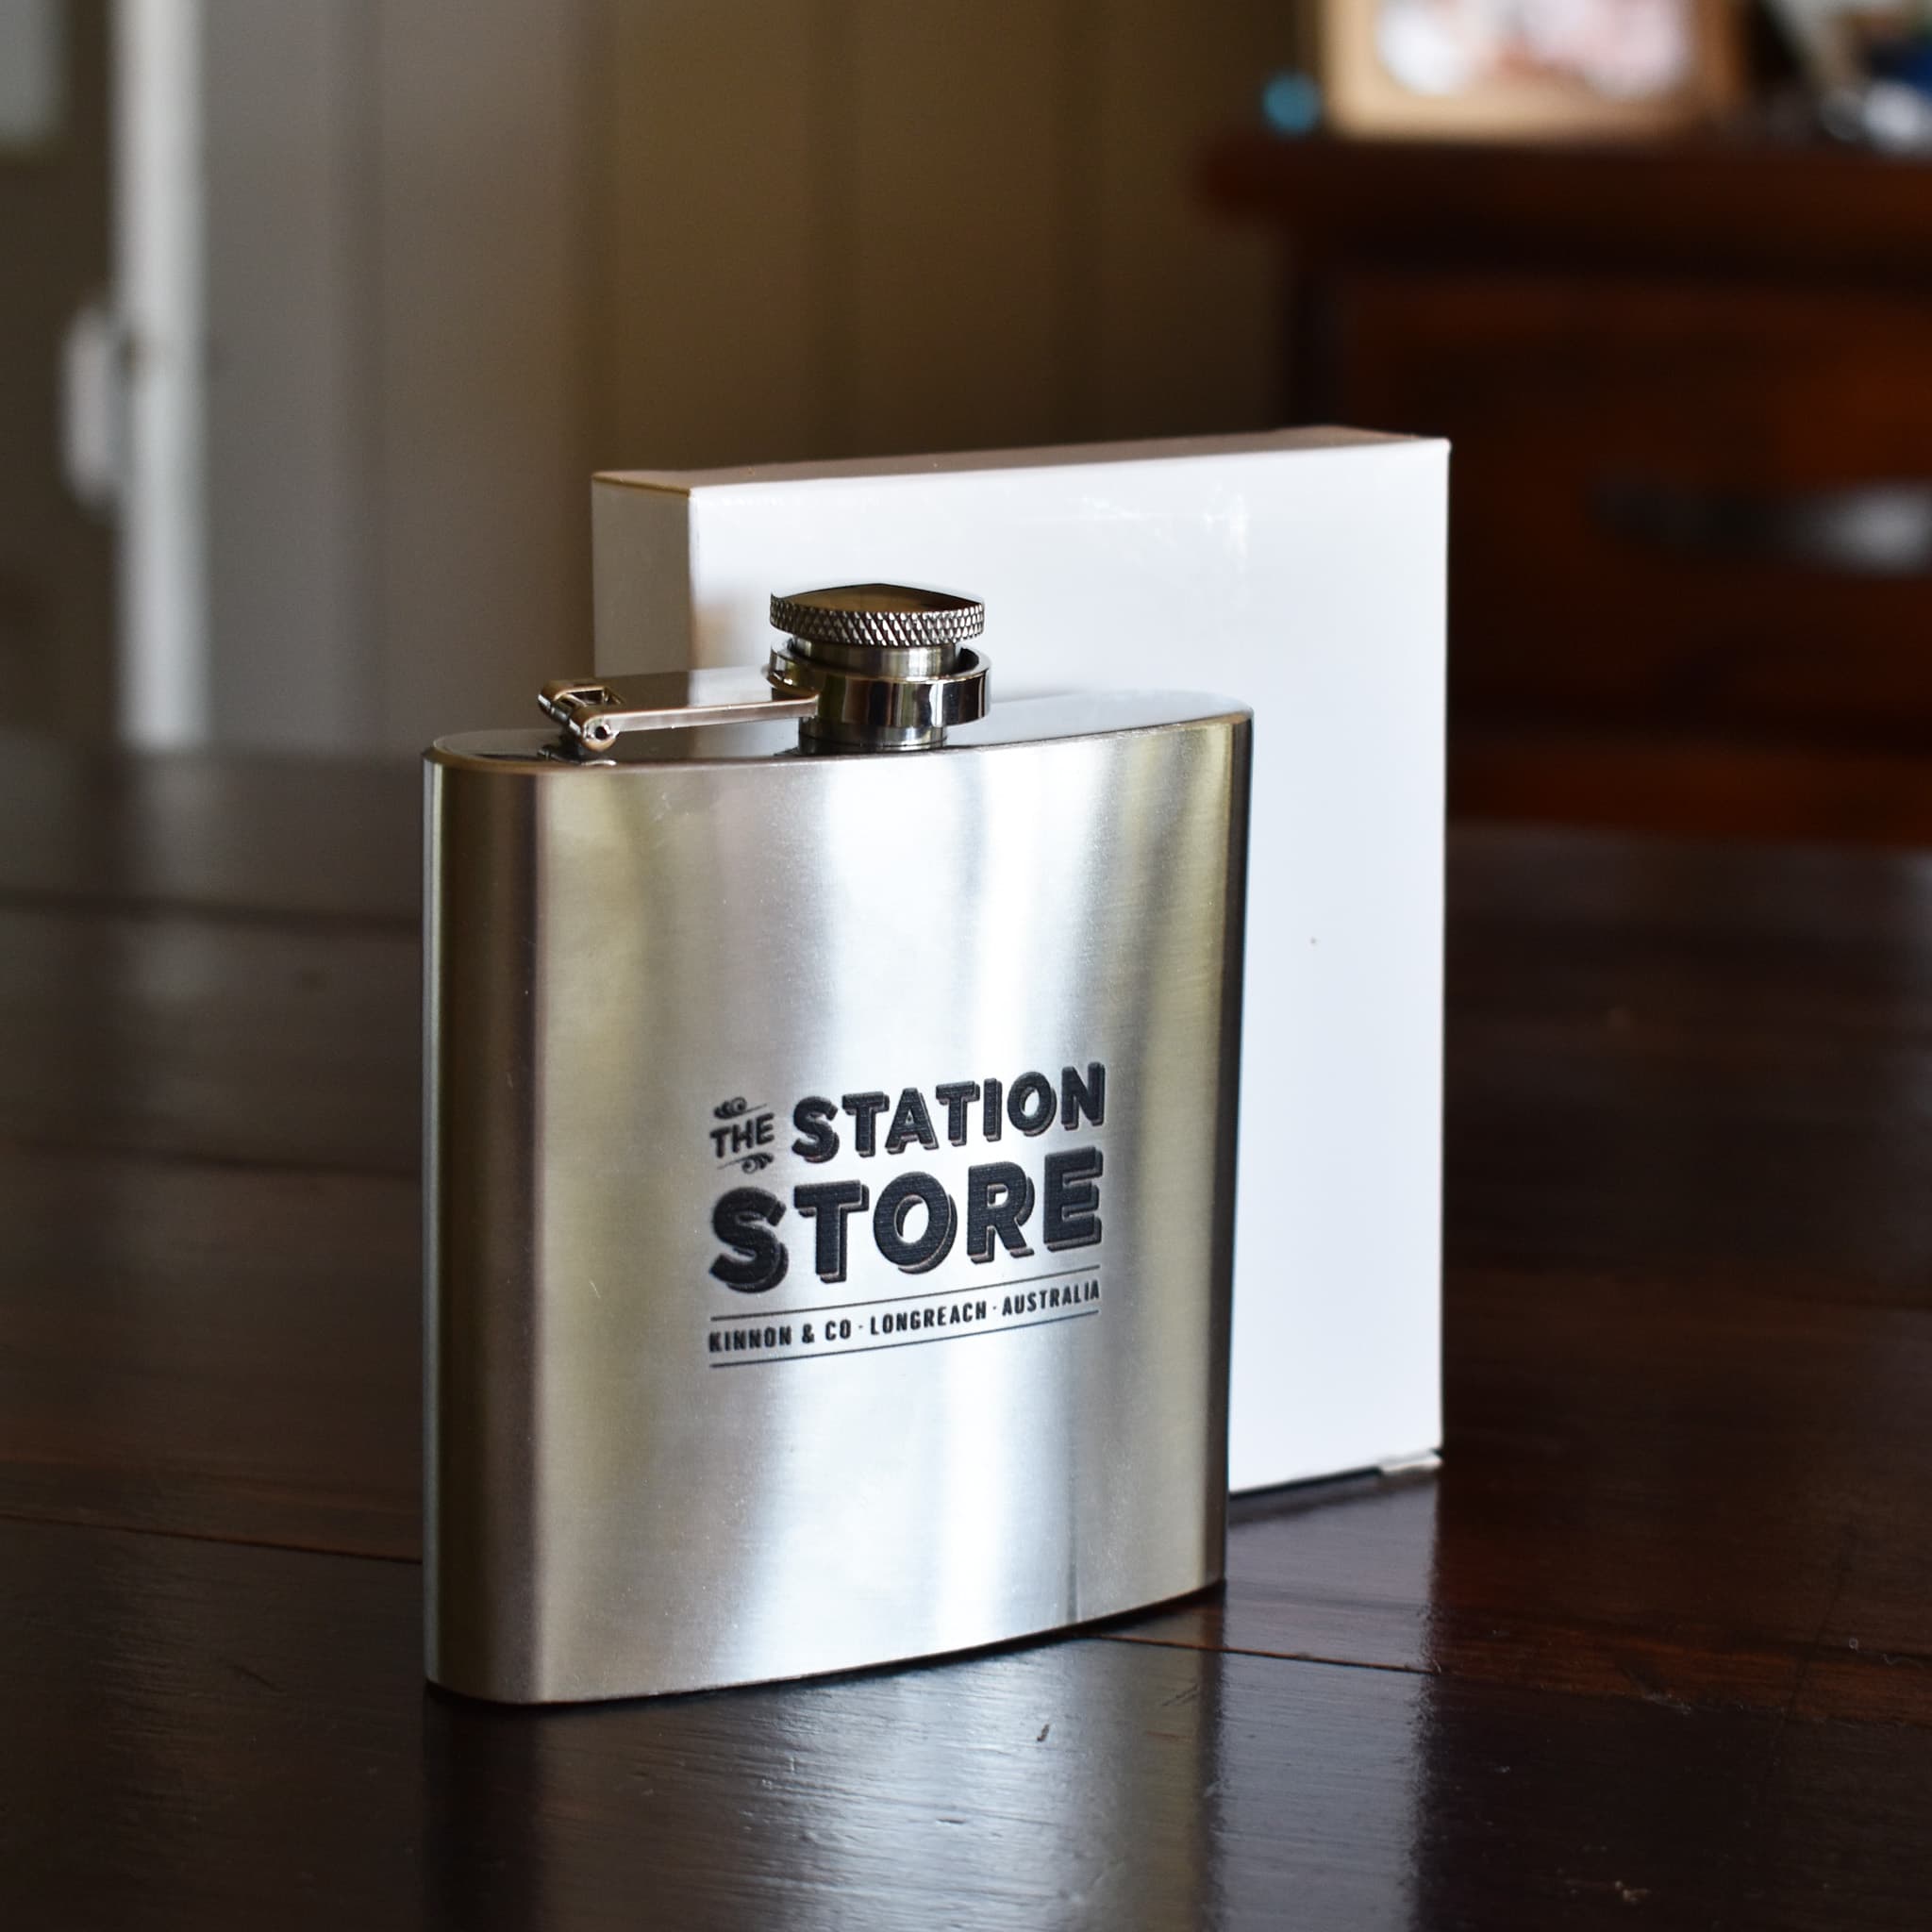 The Station Store, Longreach hip flask with white gift box.